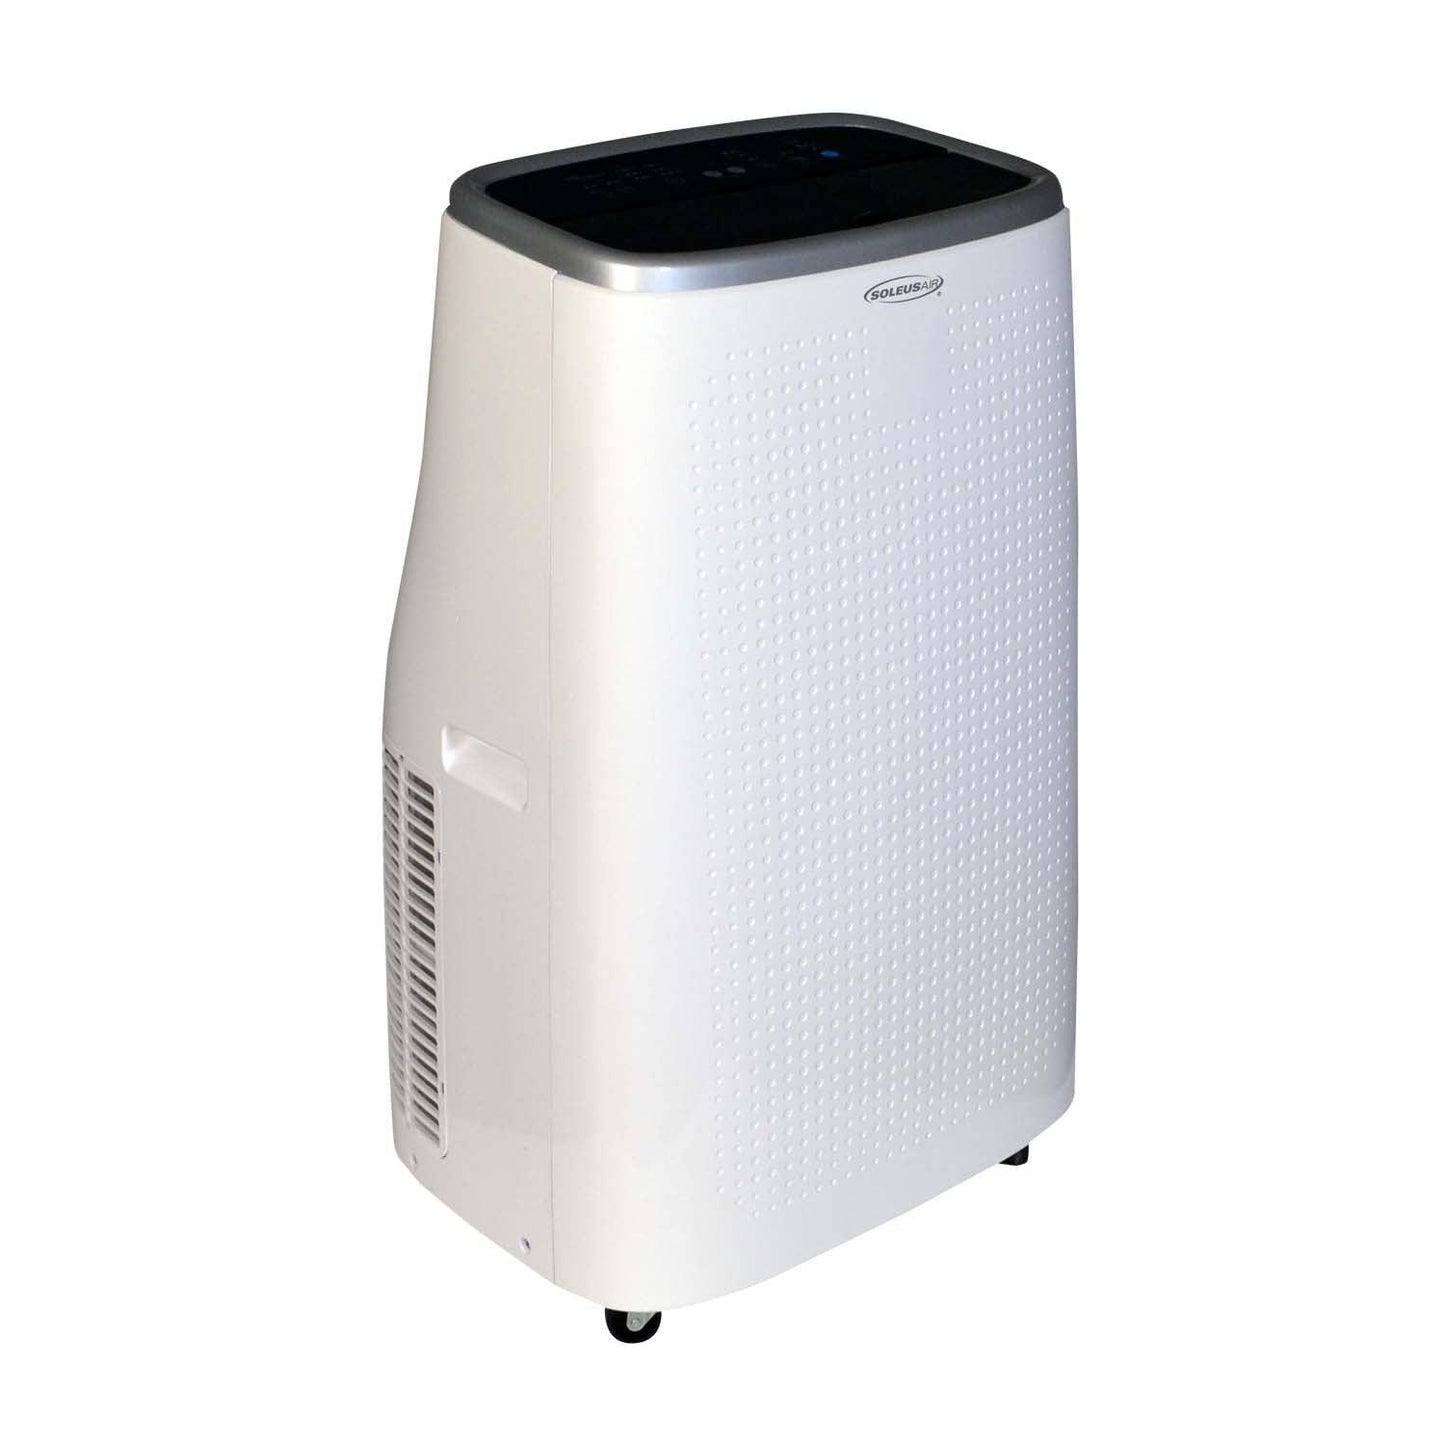 Soleus Air 10,000 Portable Air Conditioner W/ Heat Pump, Turbo Cool And Mytemp Remote Control SKU PSN-10HP-01 - Elite Air Purifiers